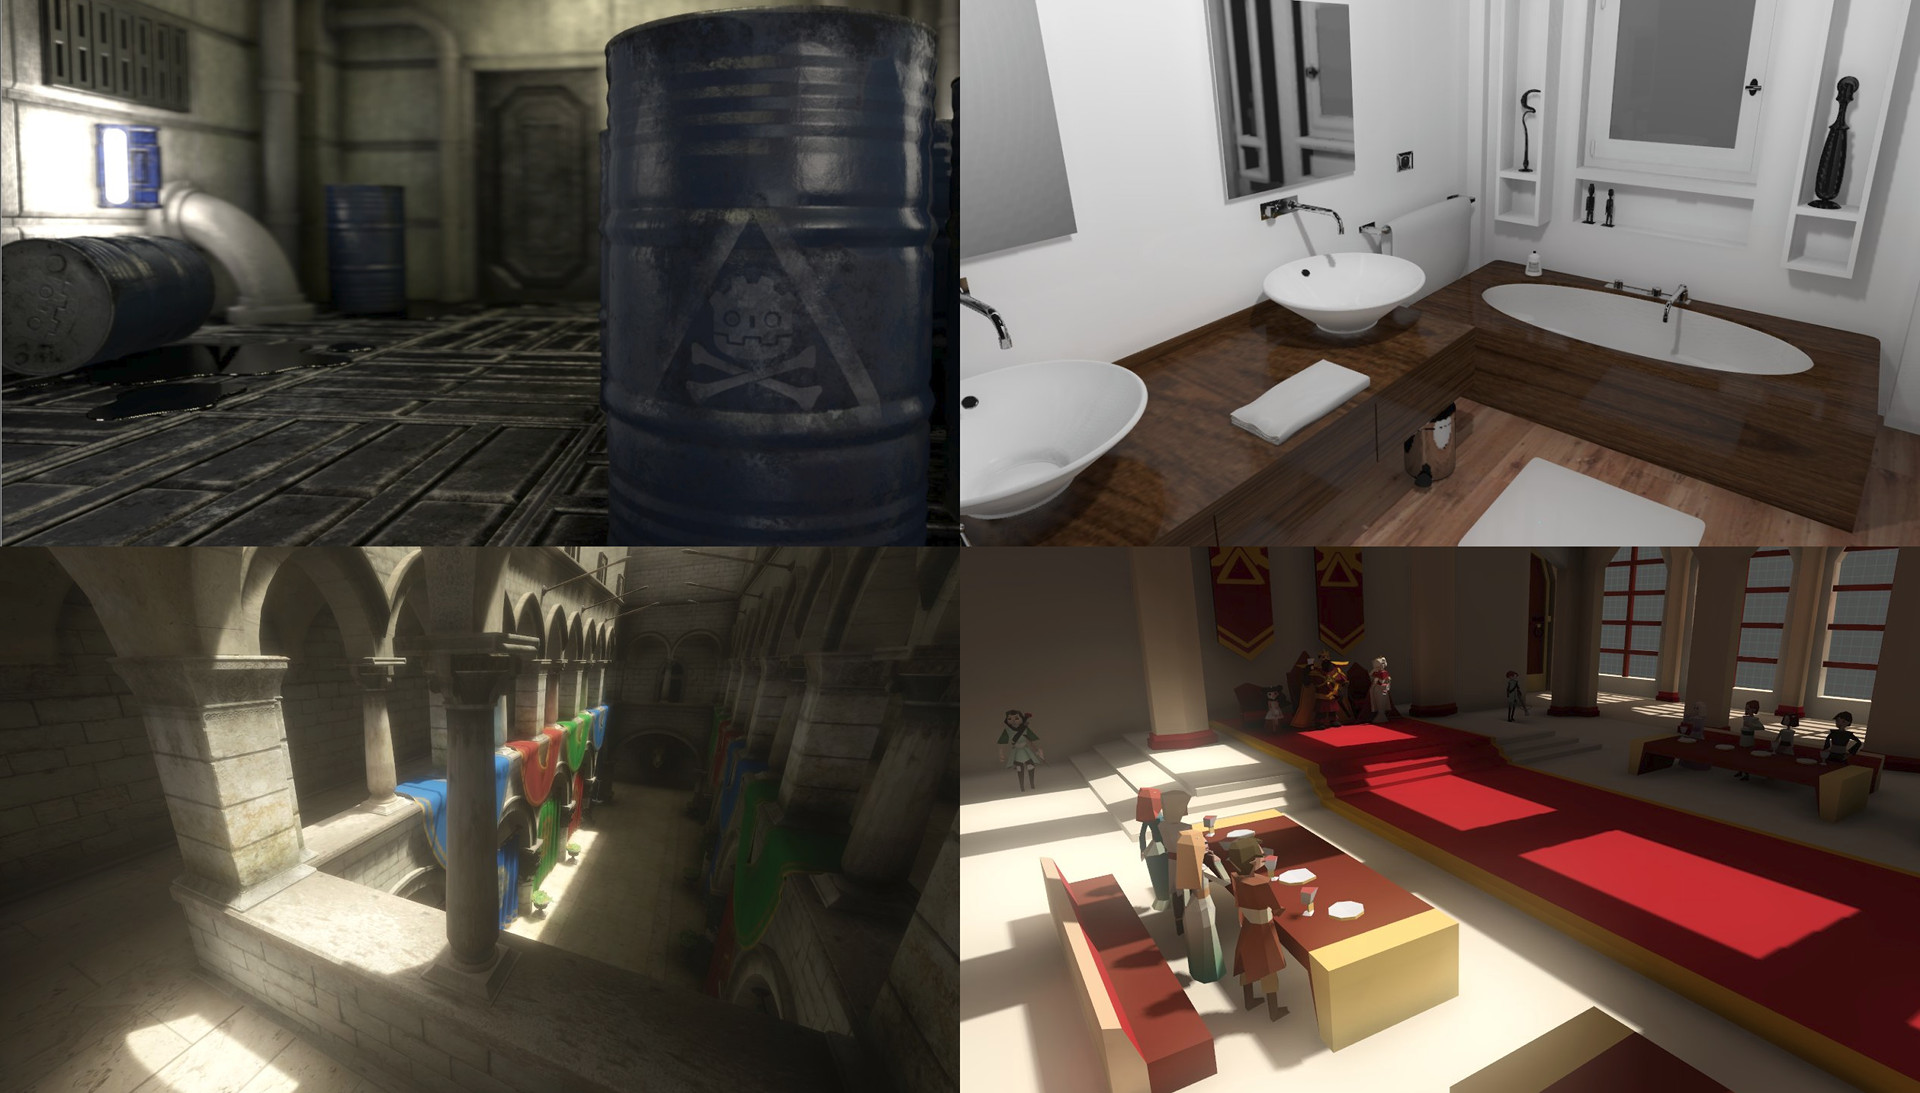 Examples of 3D scenes with PBR